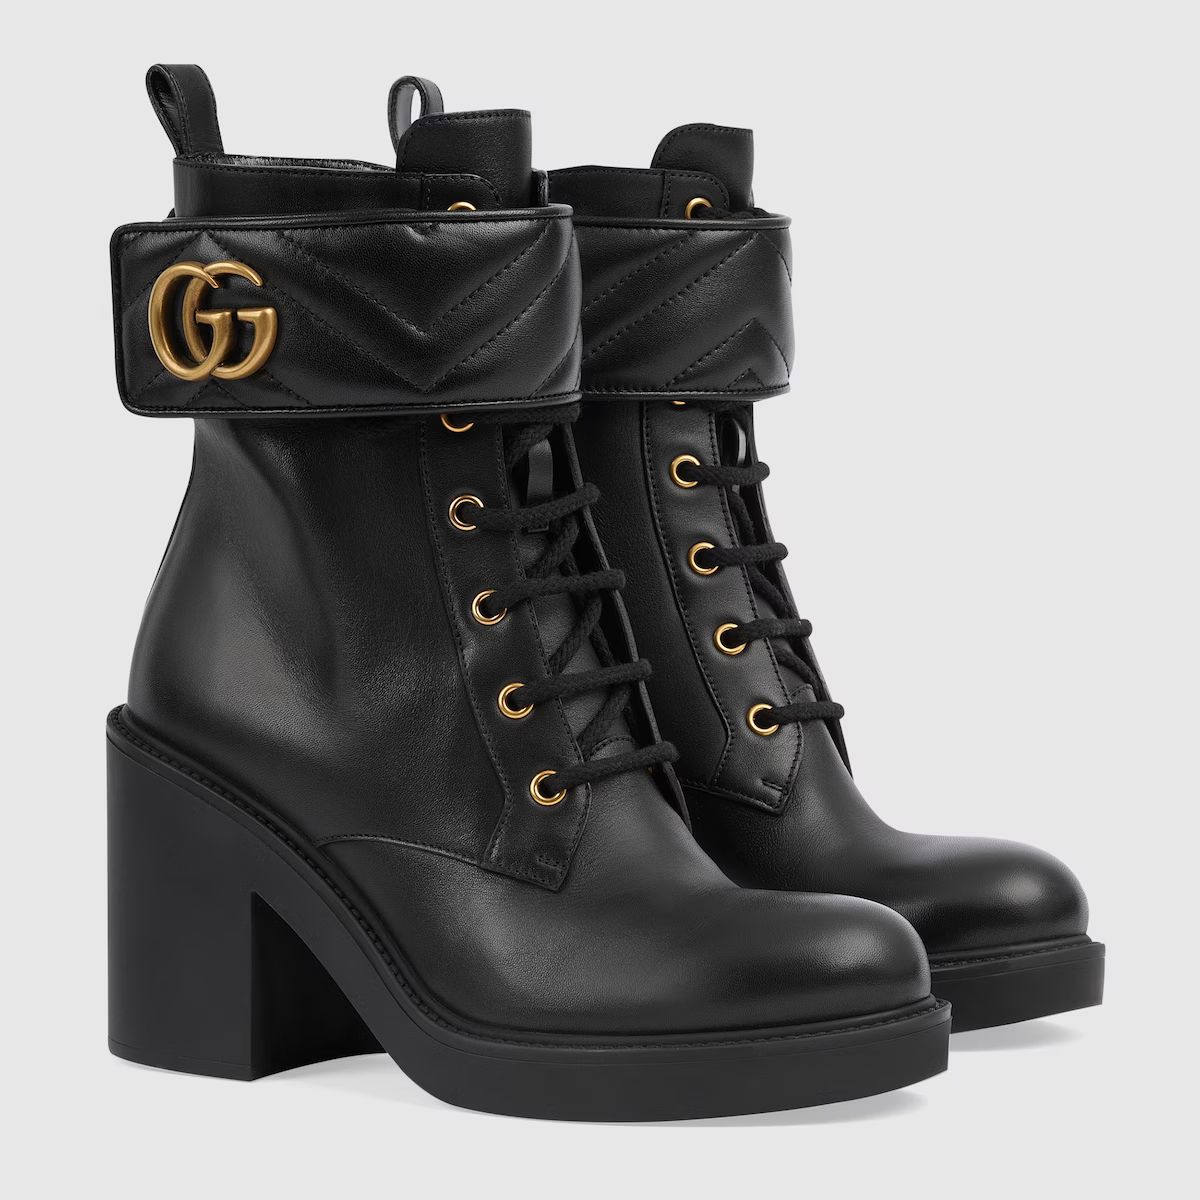 Gucci Women's boot with Double G | Gucci (US)